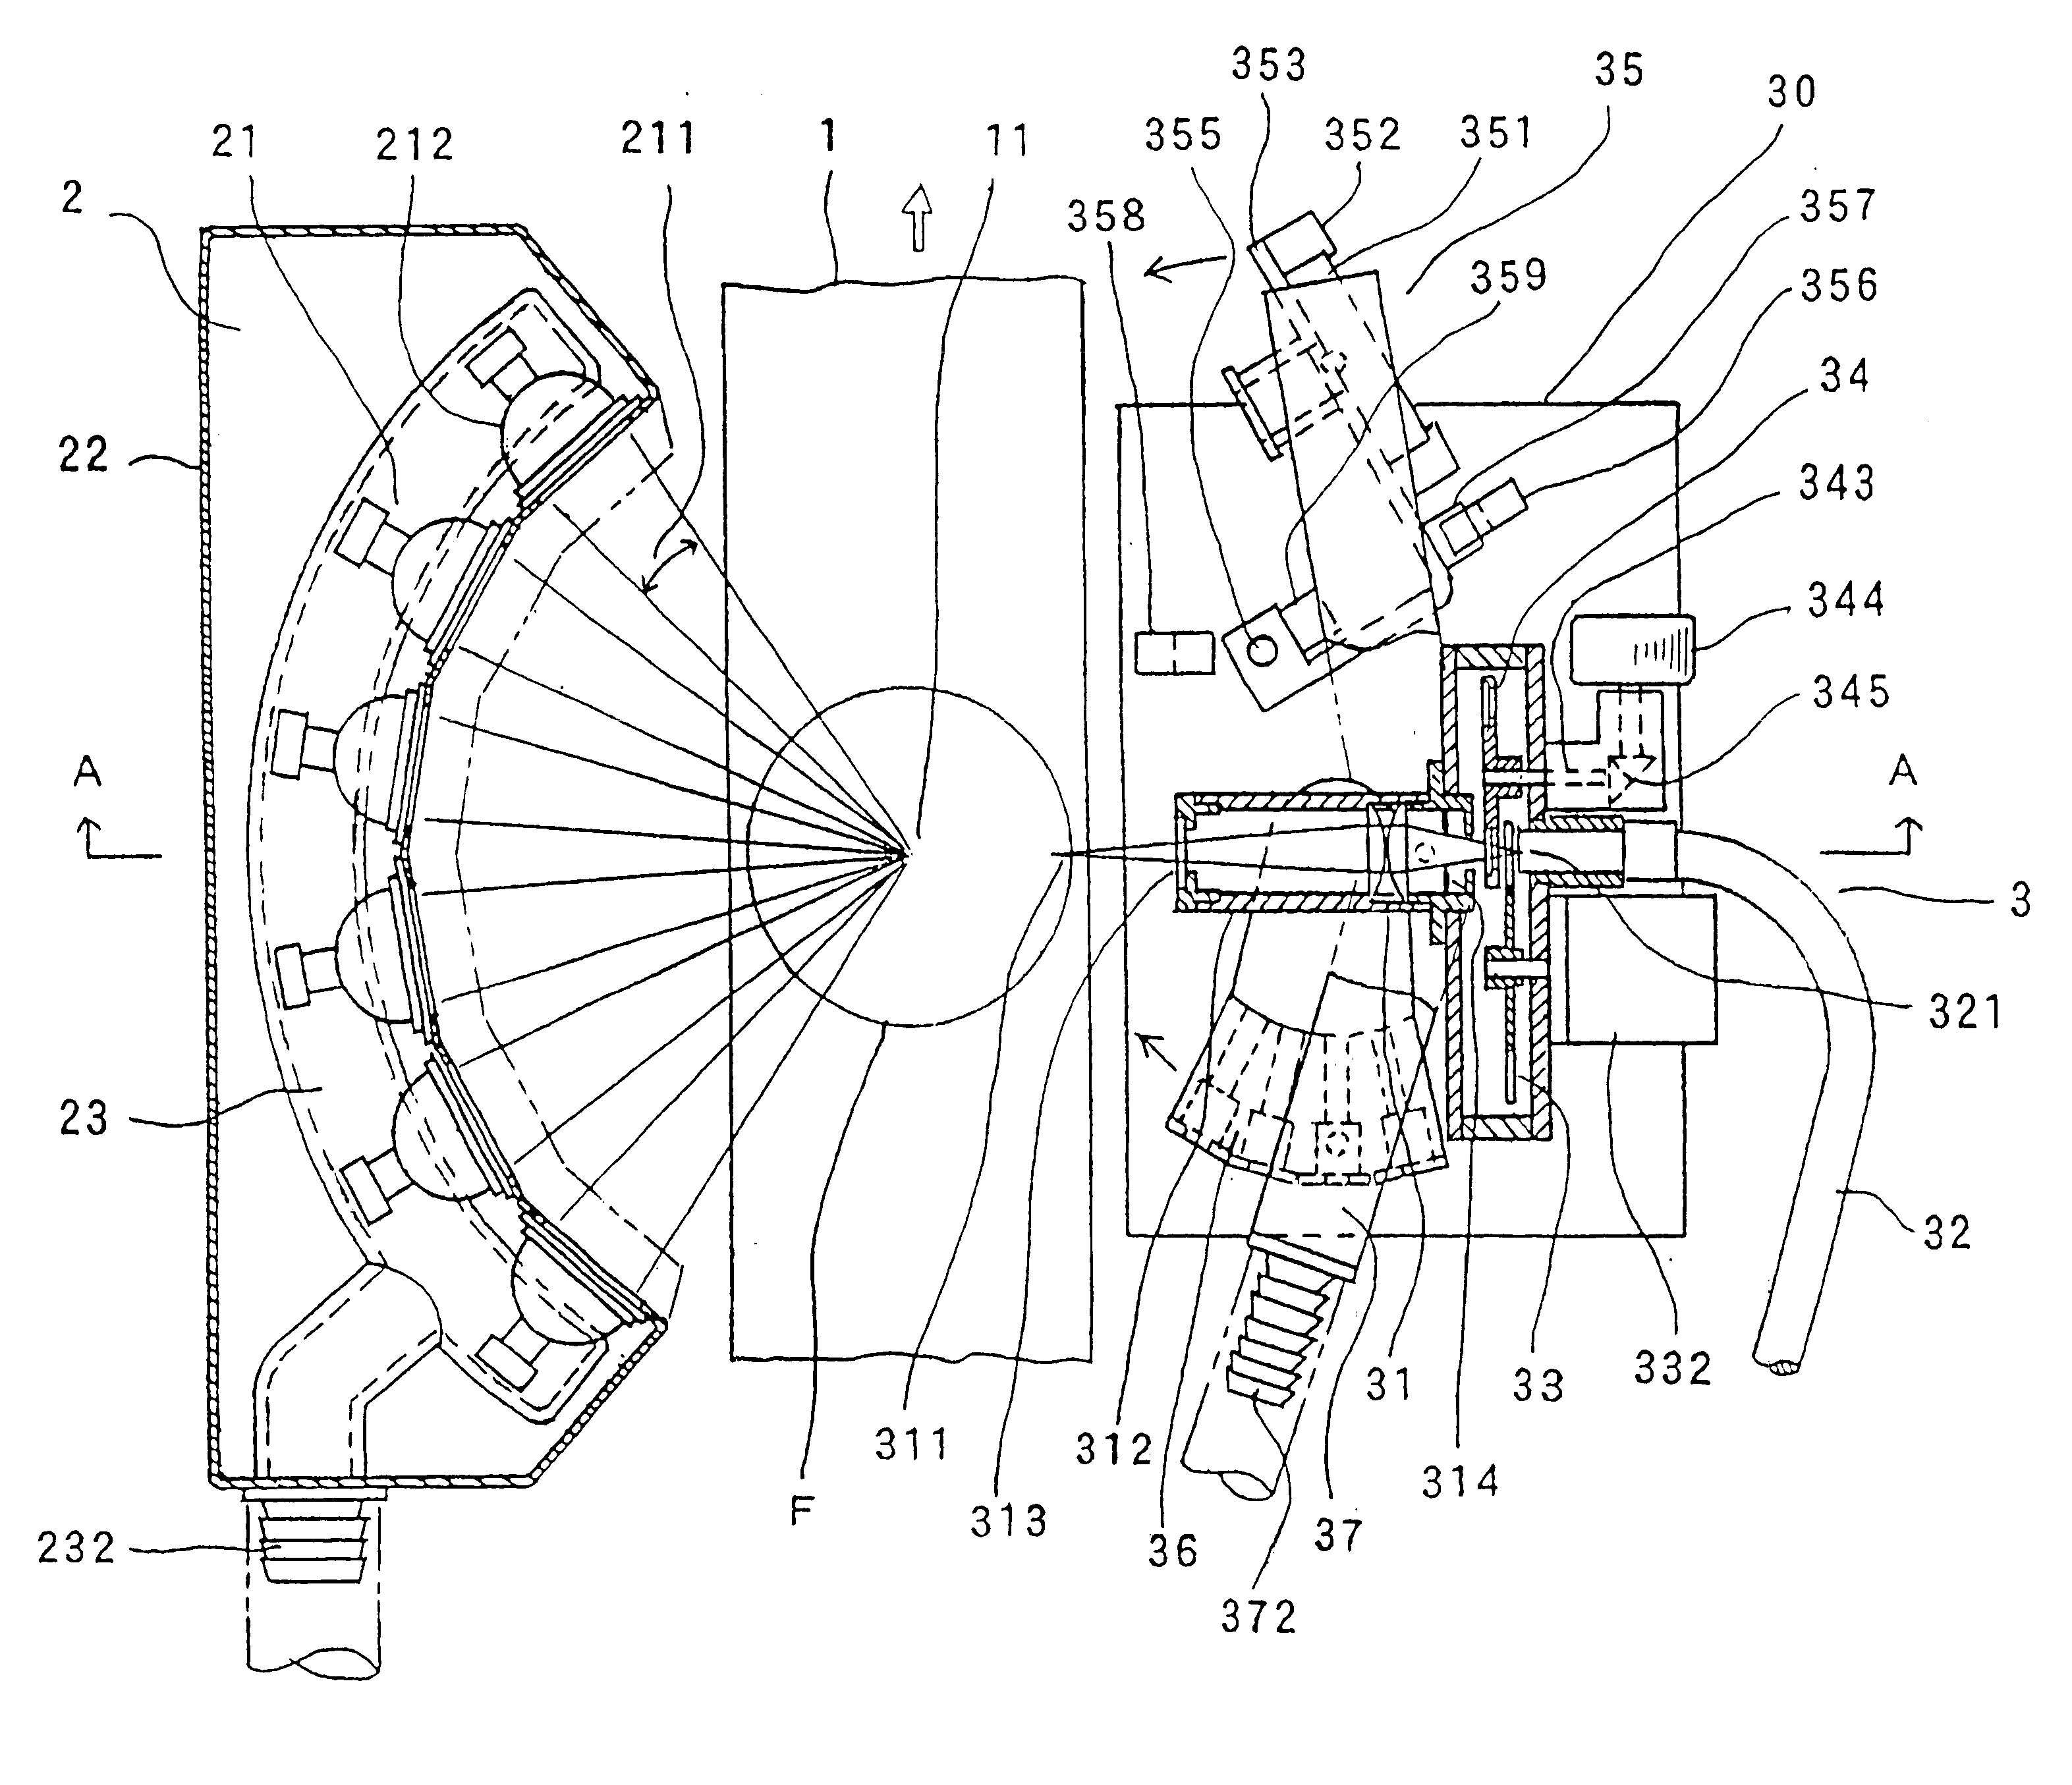 Side multiple-lamp type on-line inside quality inspecting device